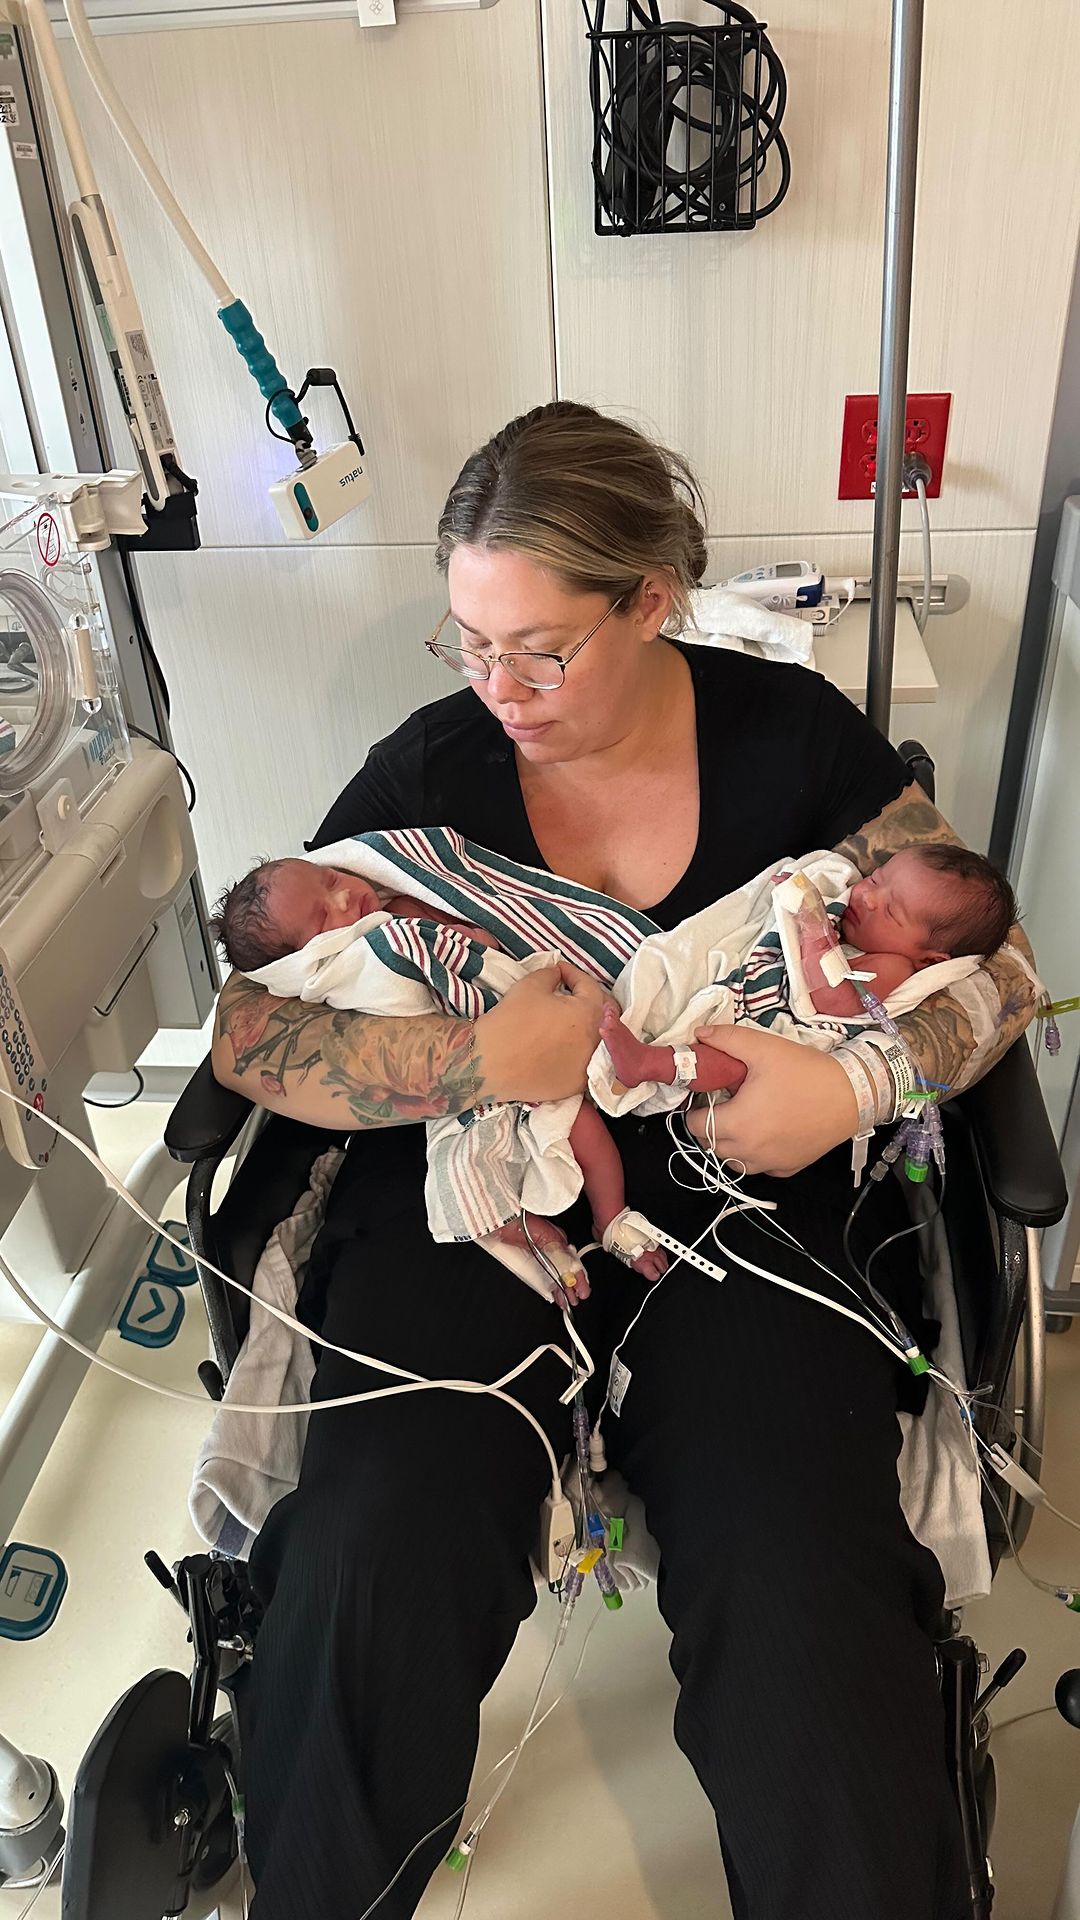 Kailyn opened up about the birth of her twins on her podcast